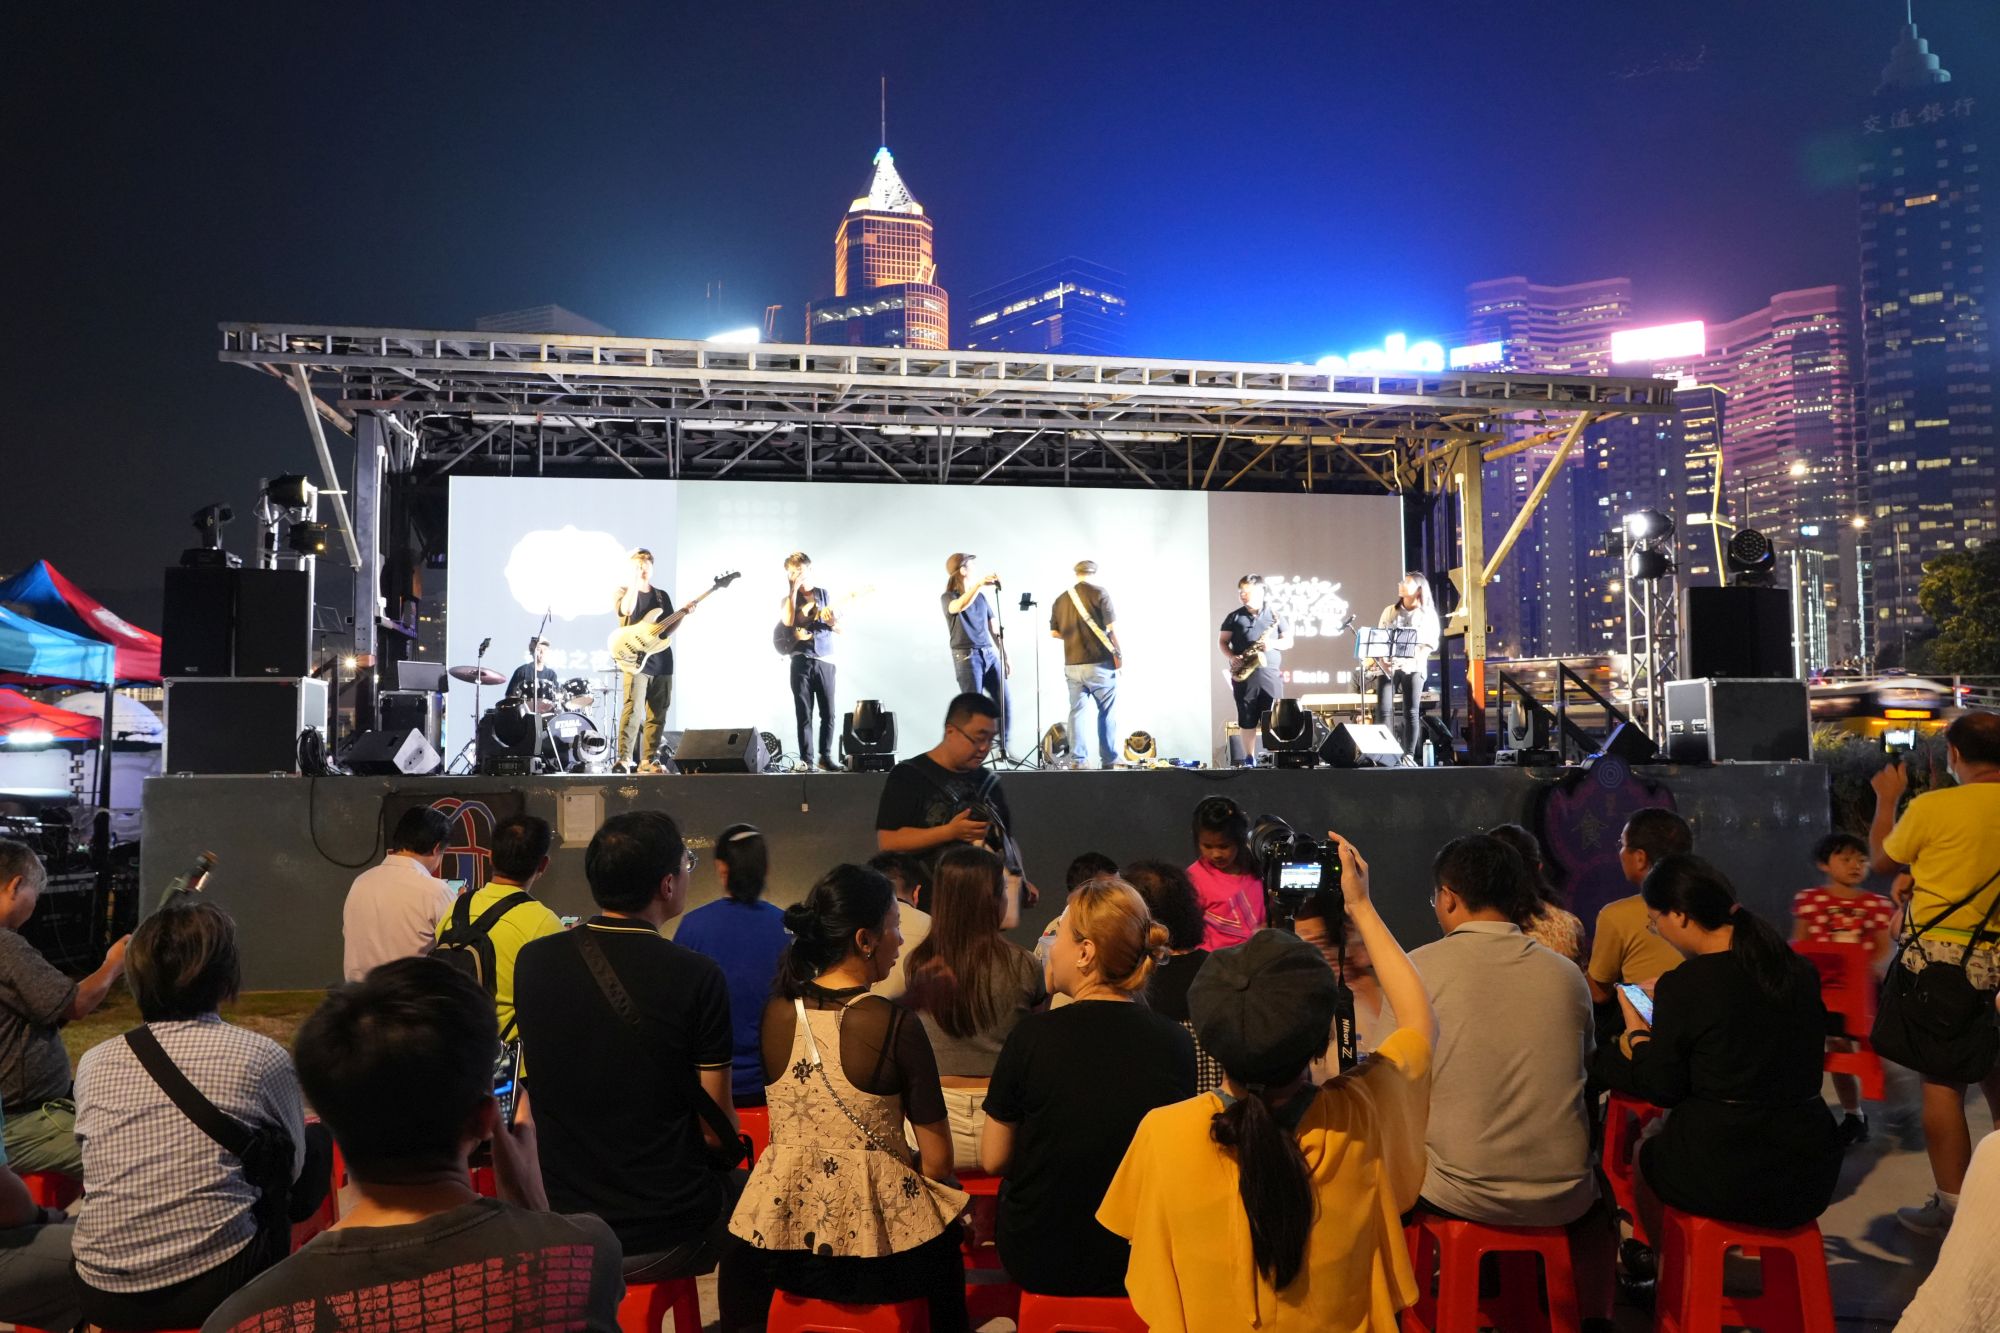 The mobile stage in “Uniquely Hong Kong” is transformed from a 40-foot long container. 